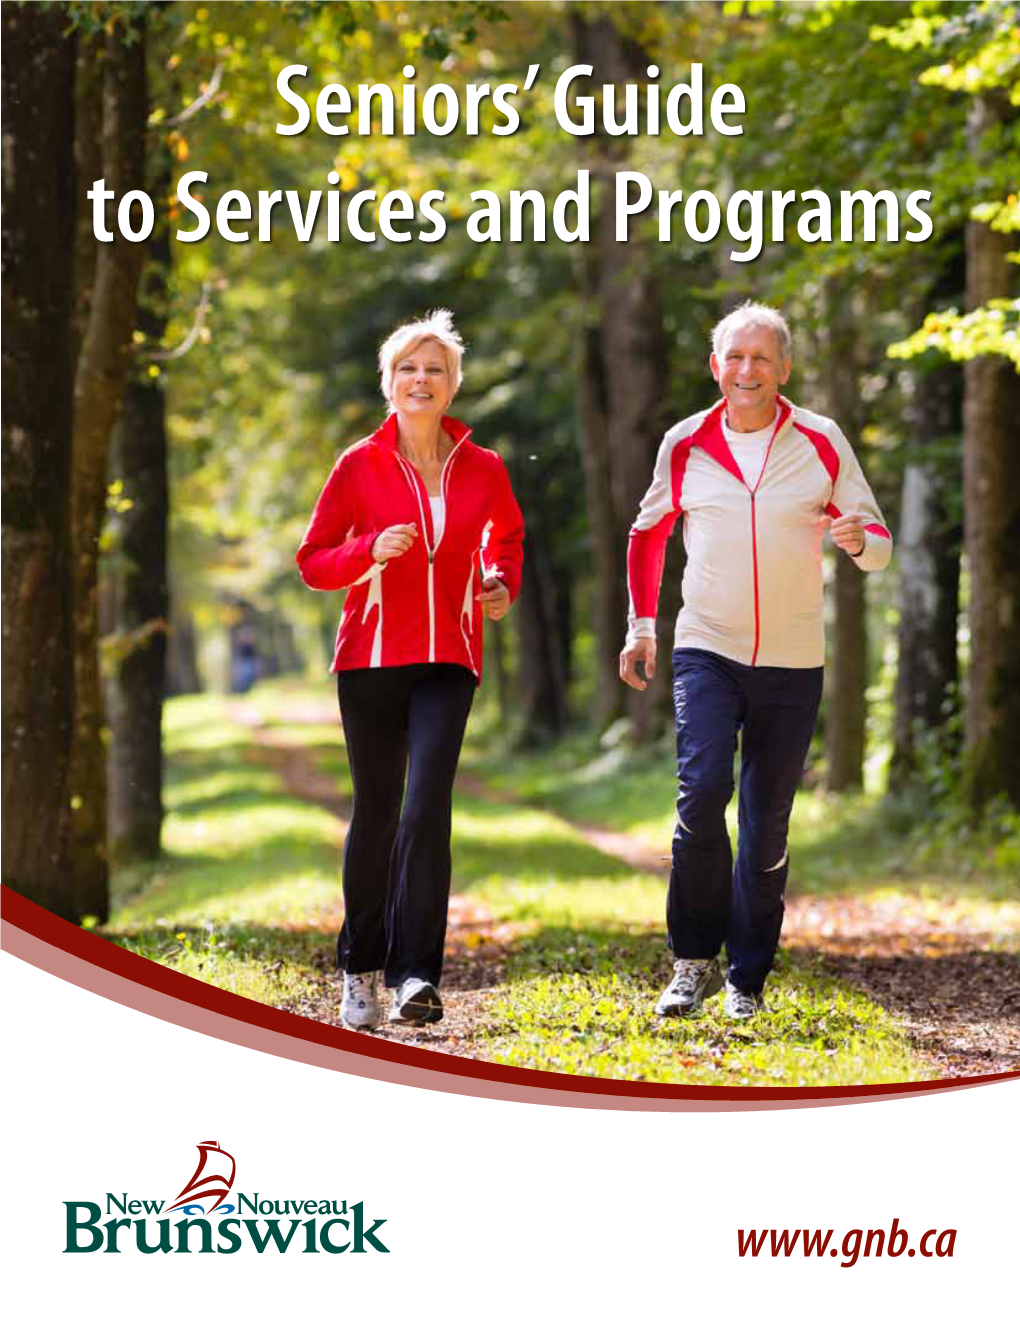 Seniors' Guide to Services and Programs